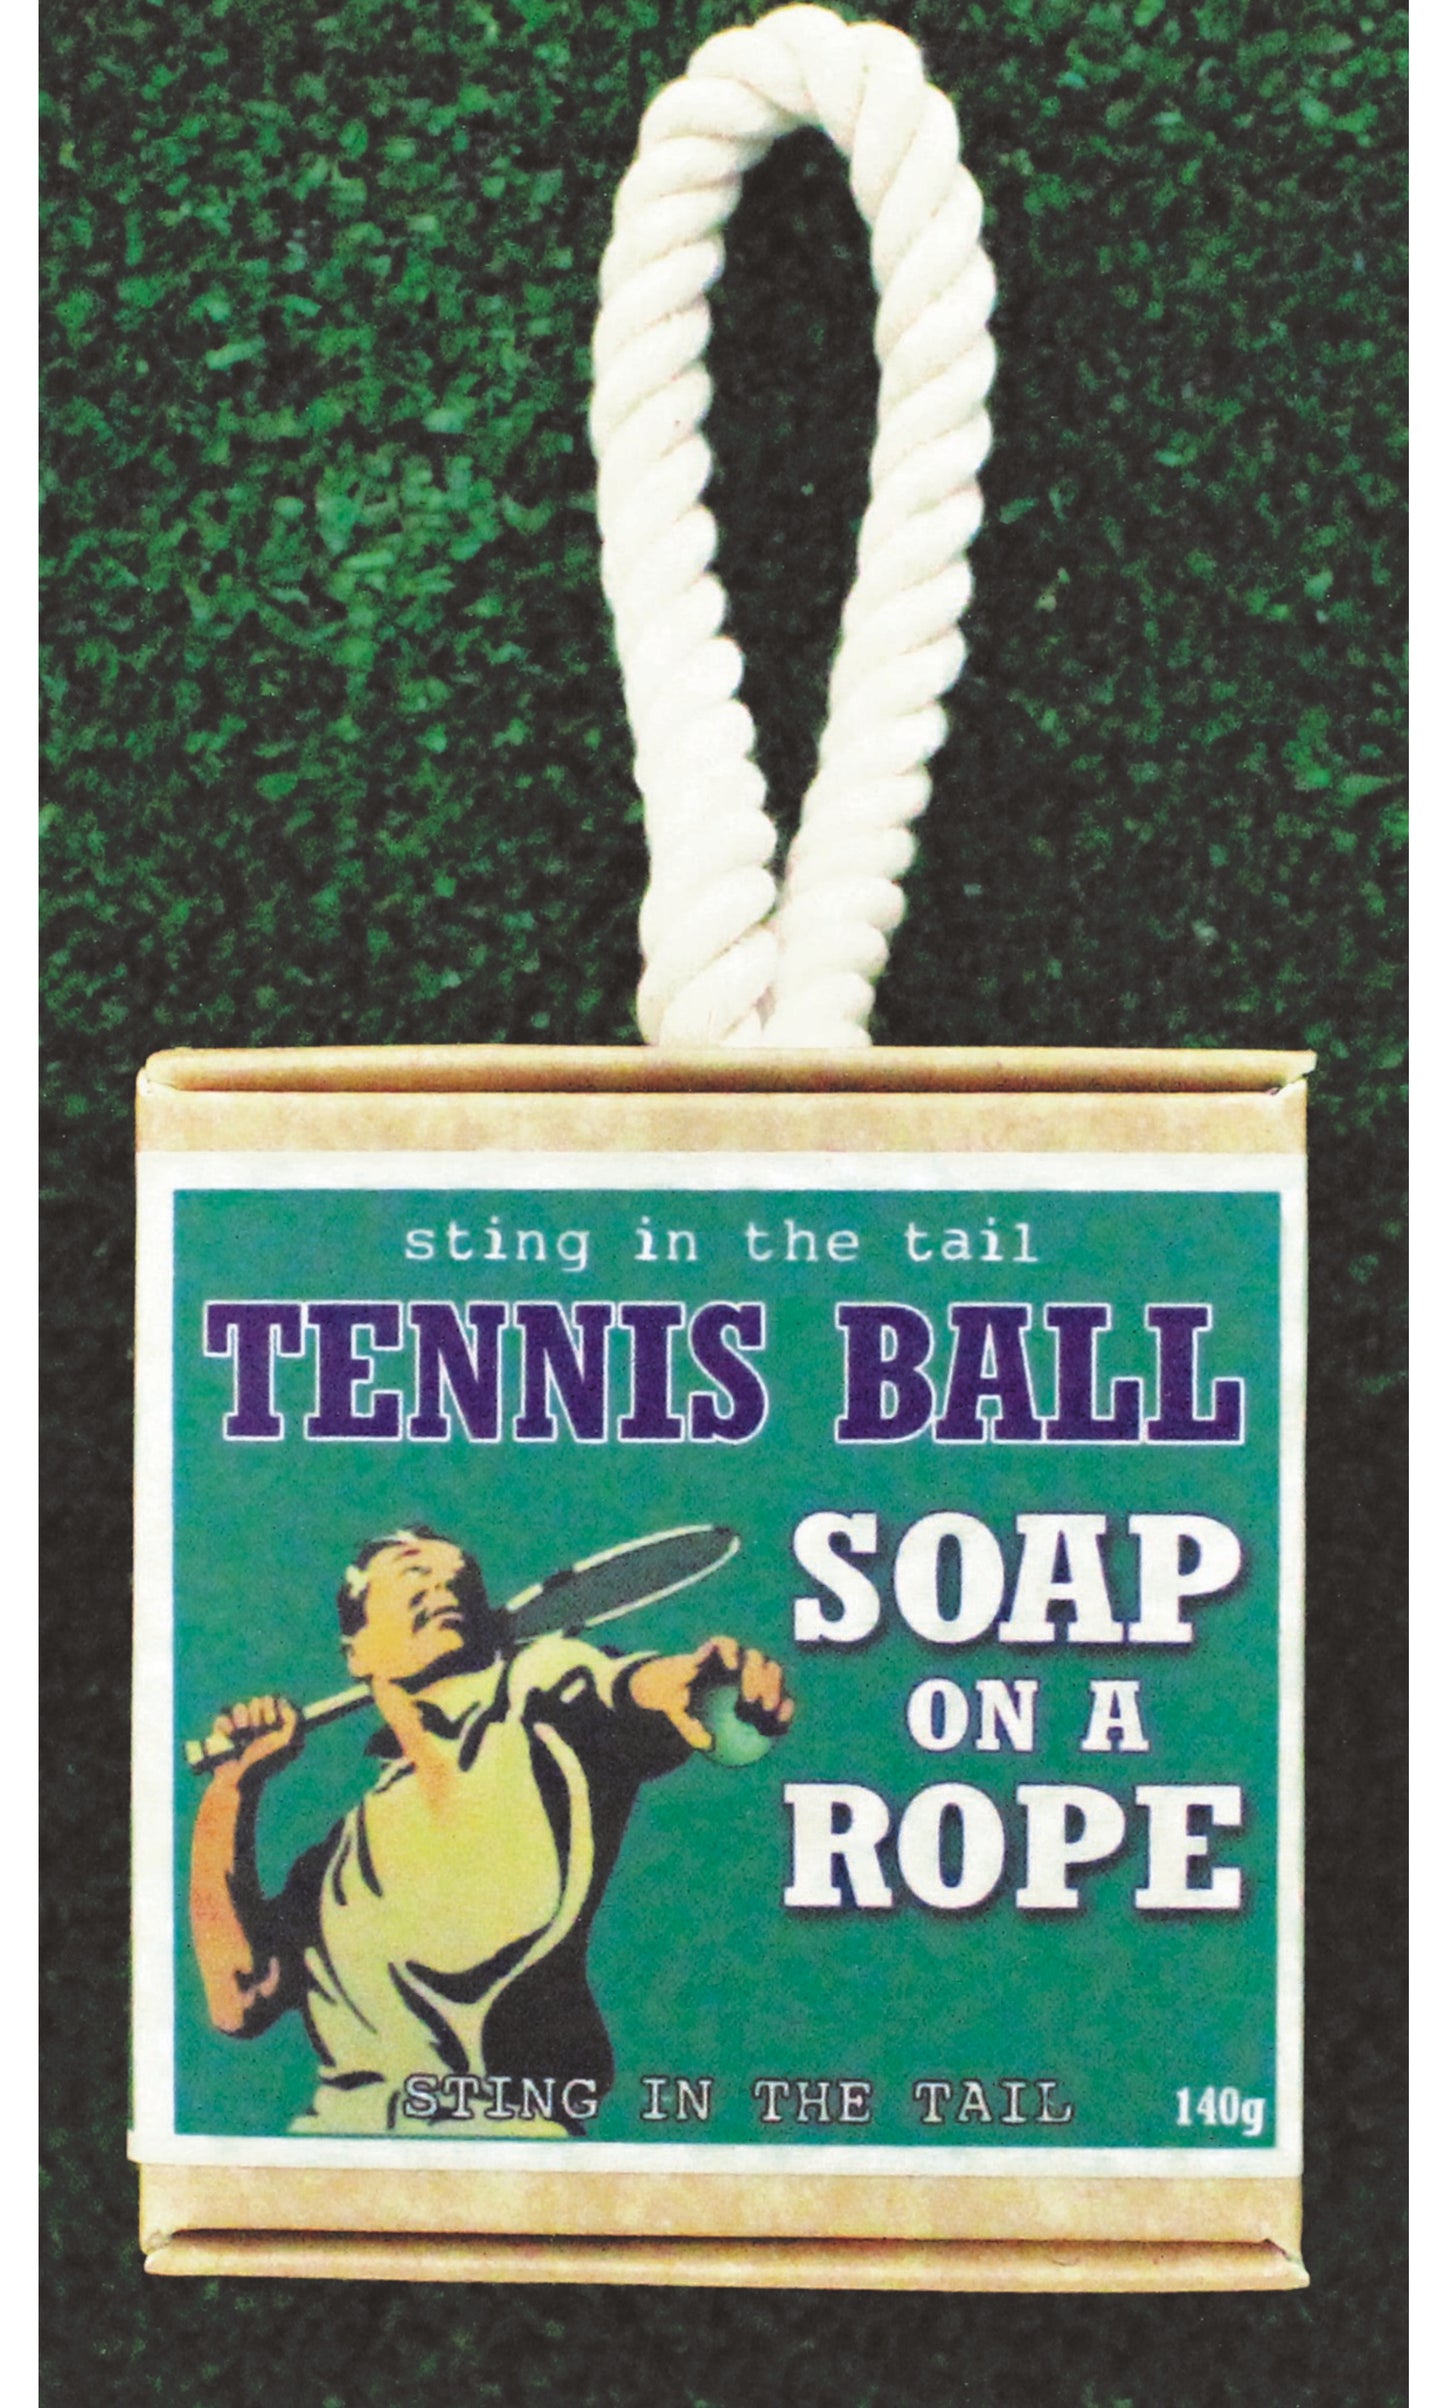 Soap-on-a-Rope Tennis